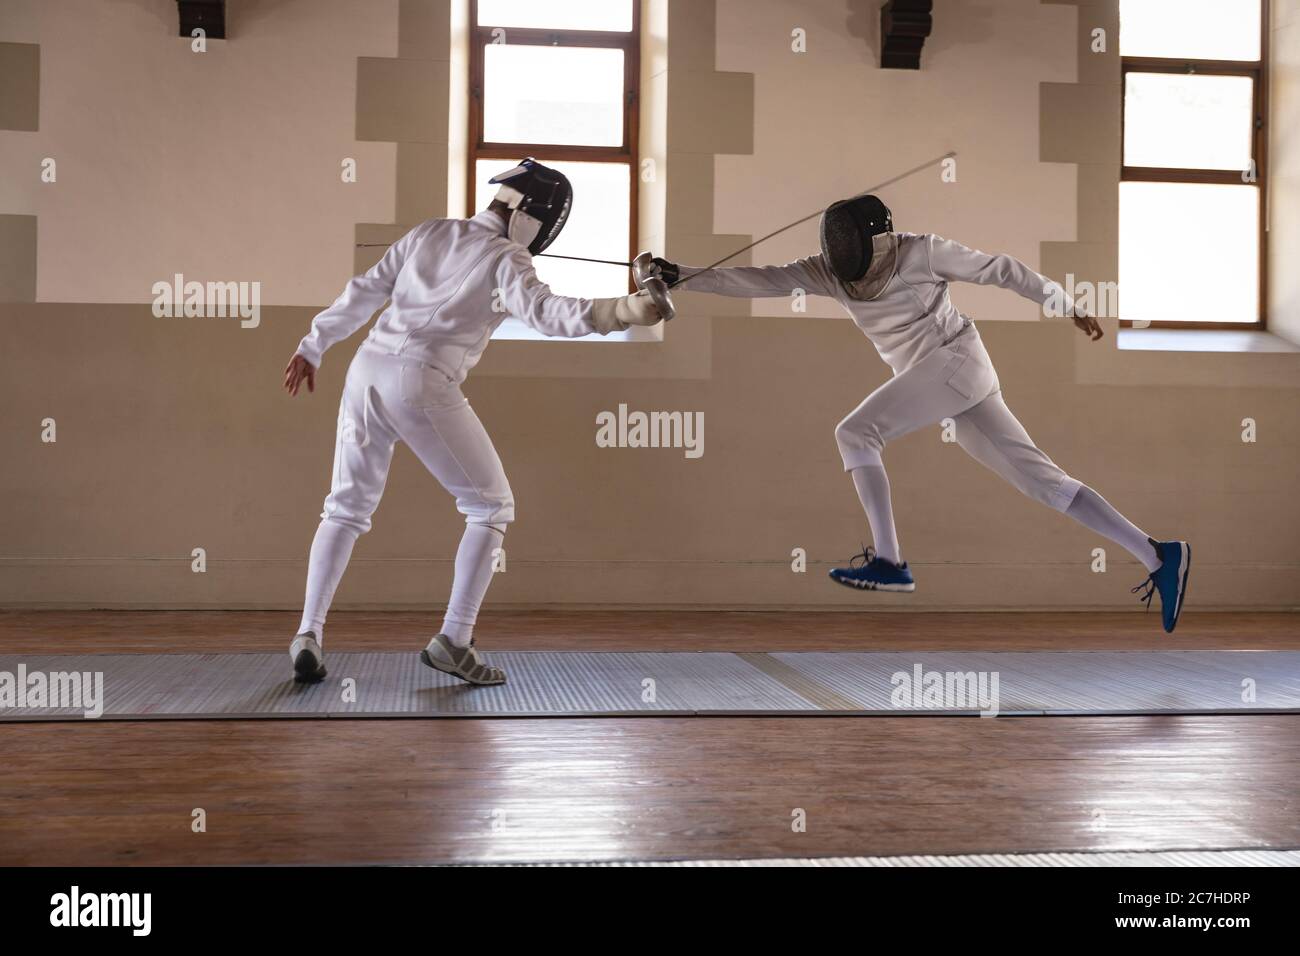 Two male fencers practicing fencing Stock Photo